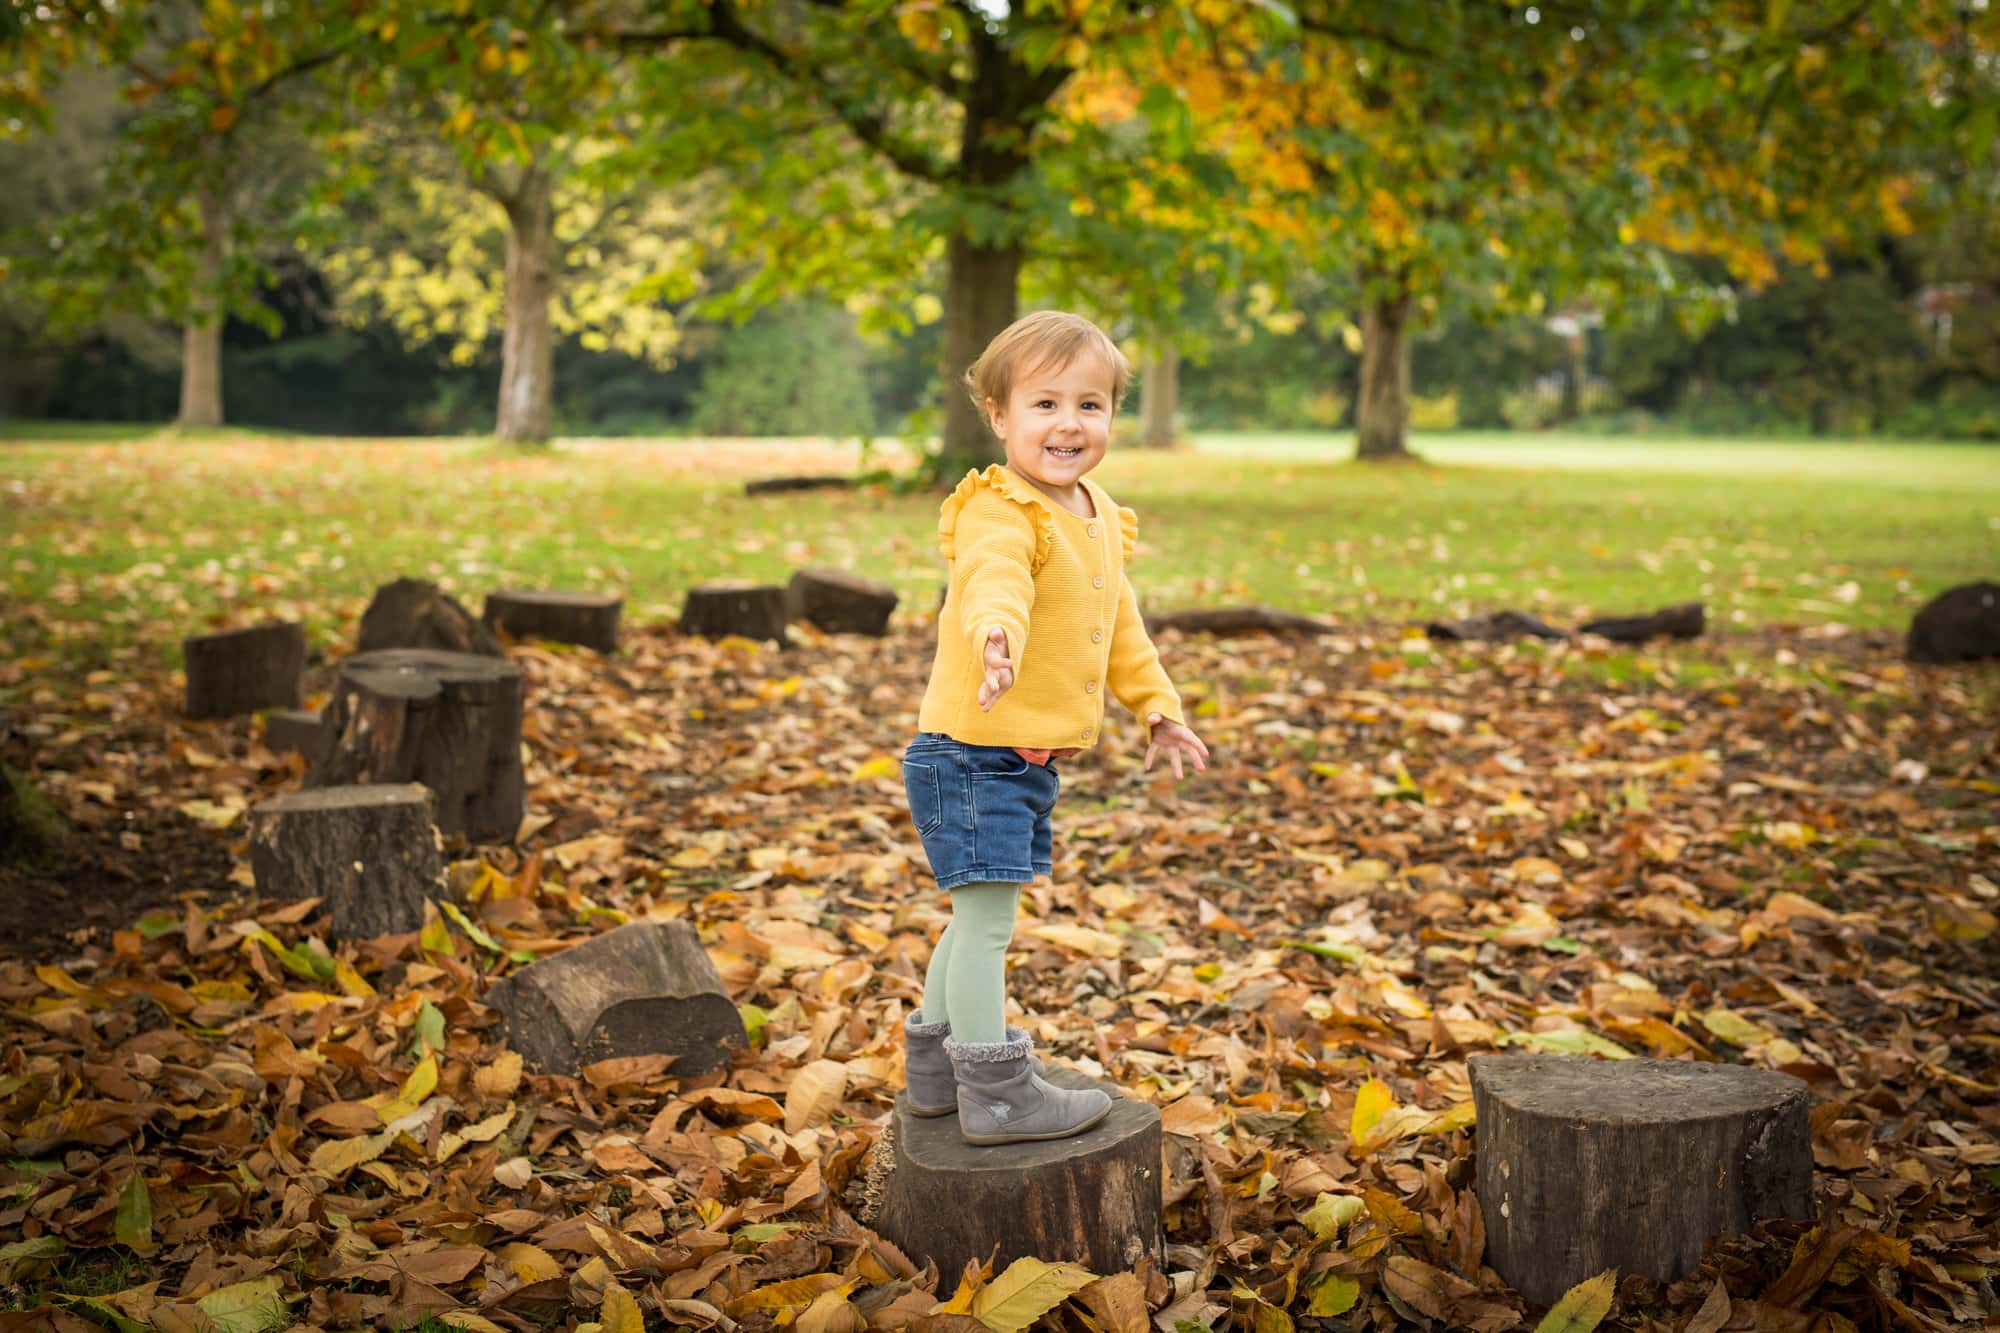 Toddler playing in Autumn leaves in mini session photoshoot in Beckenham Place Park taken by Bromley photographer